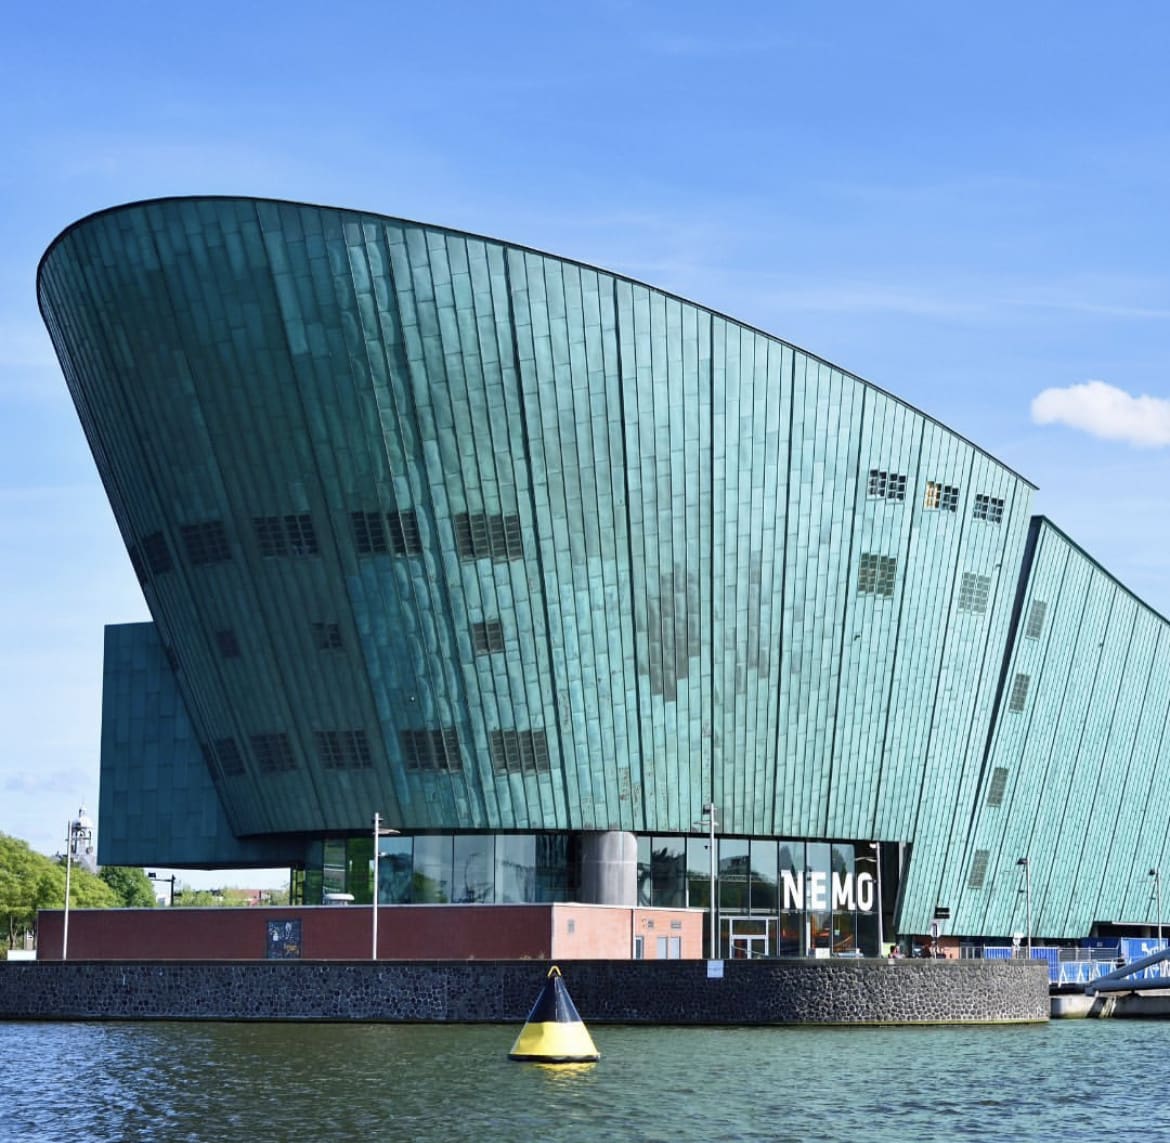 NEMO Science Museum - 15 Top Museums In Amsterdam